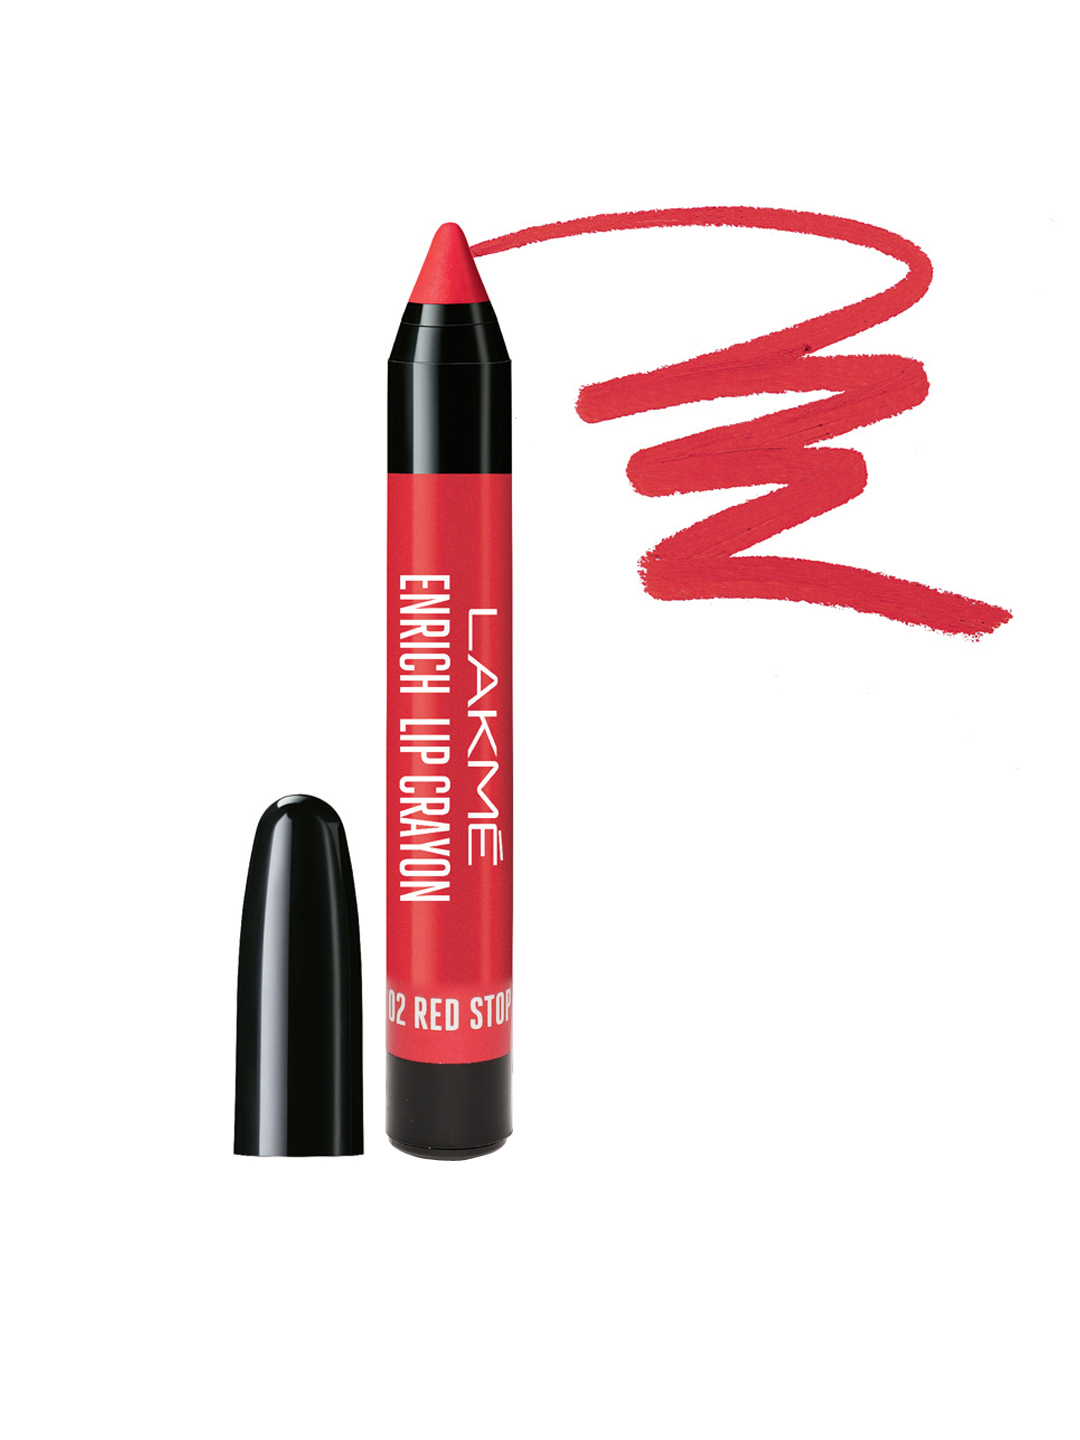 Lakme Enrich Red Stop Lip Crayon 02 Price in India